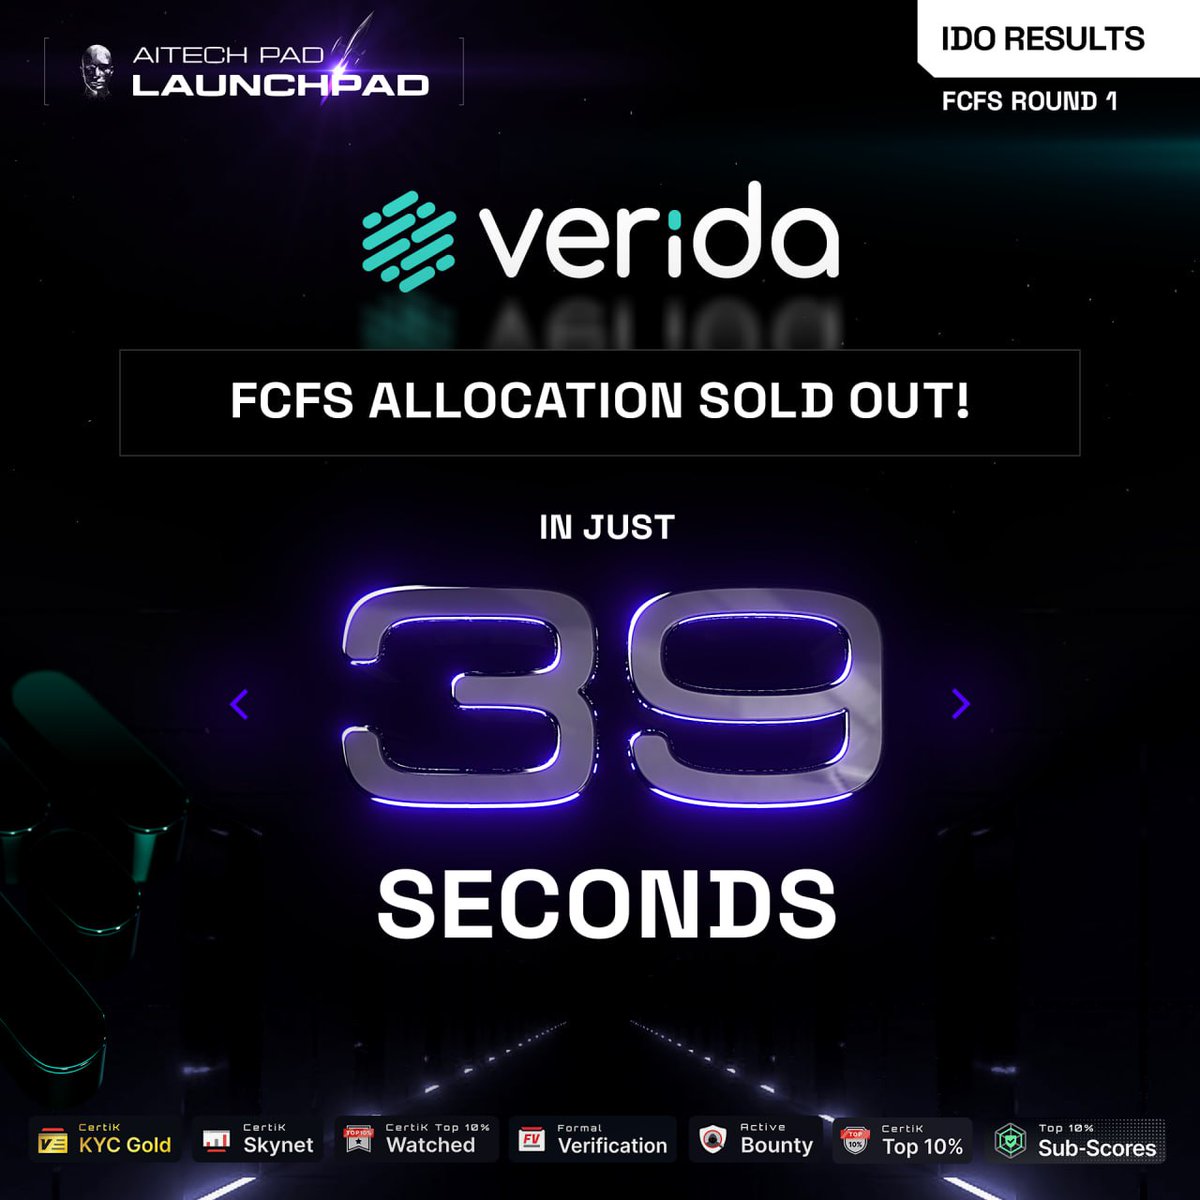 🔥 FCFS: SOLD OUT IN 39 SECONDS!

🌟 Verida FCFS on AITECH Pad sells out in 39 seconds.

📈 Public Round
🏦 Allocation $150,000
🔗 aitechpad.io/project/verida…